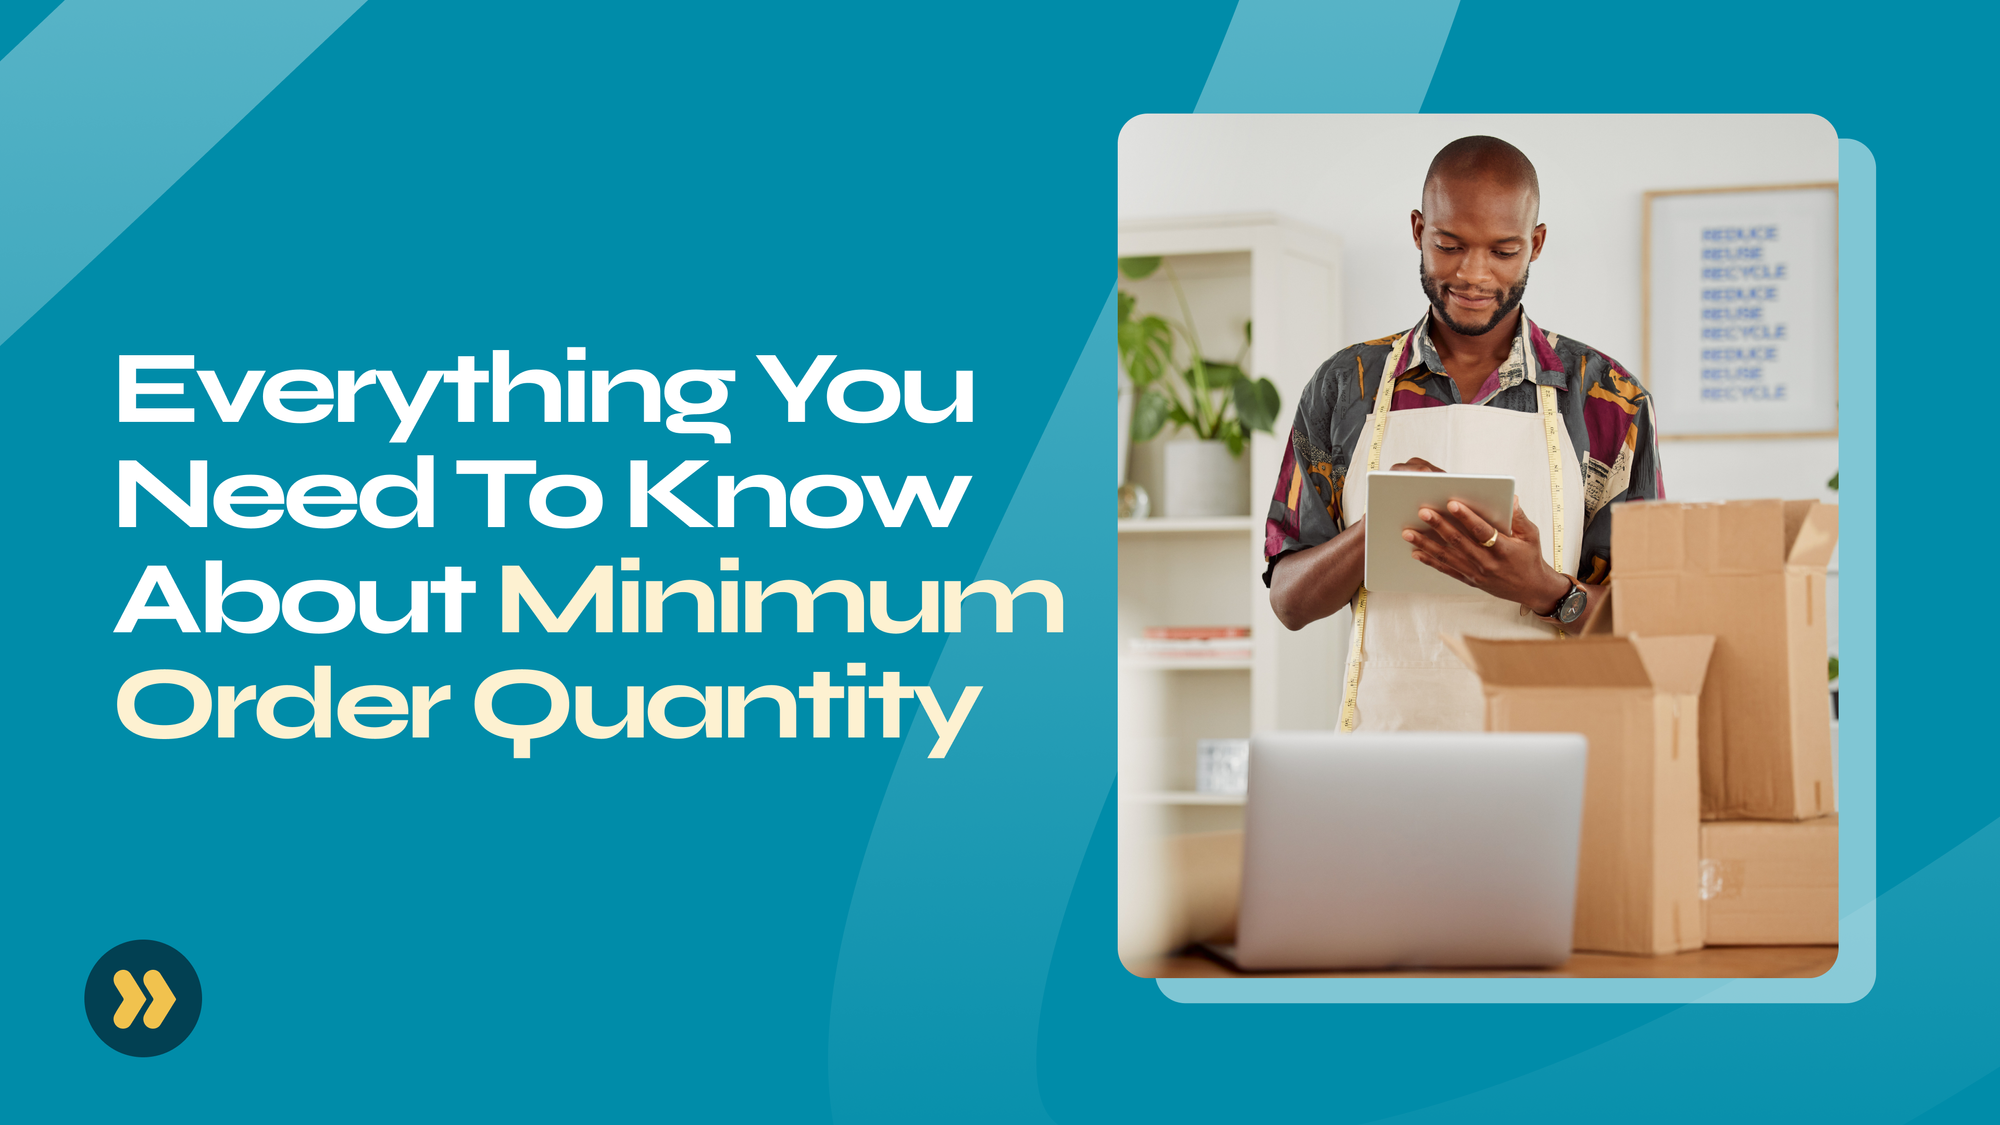 Everything You Need To Know About Minimum Order Quantity